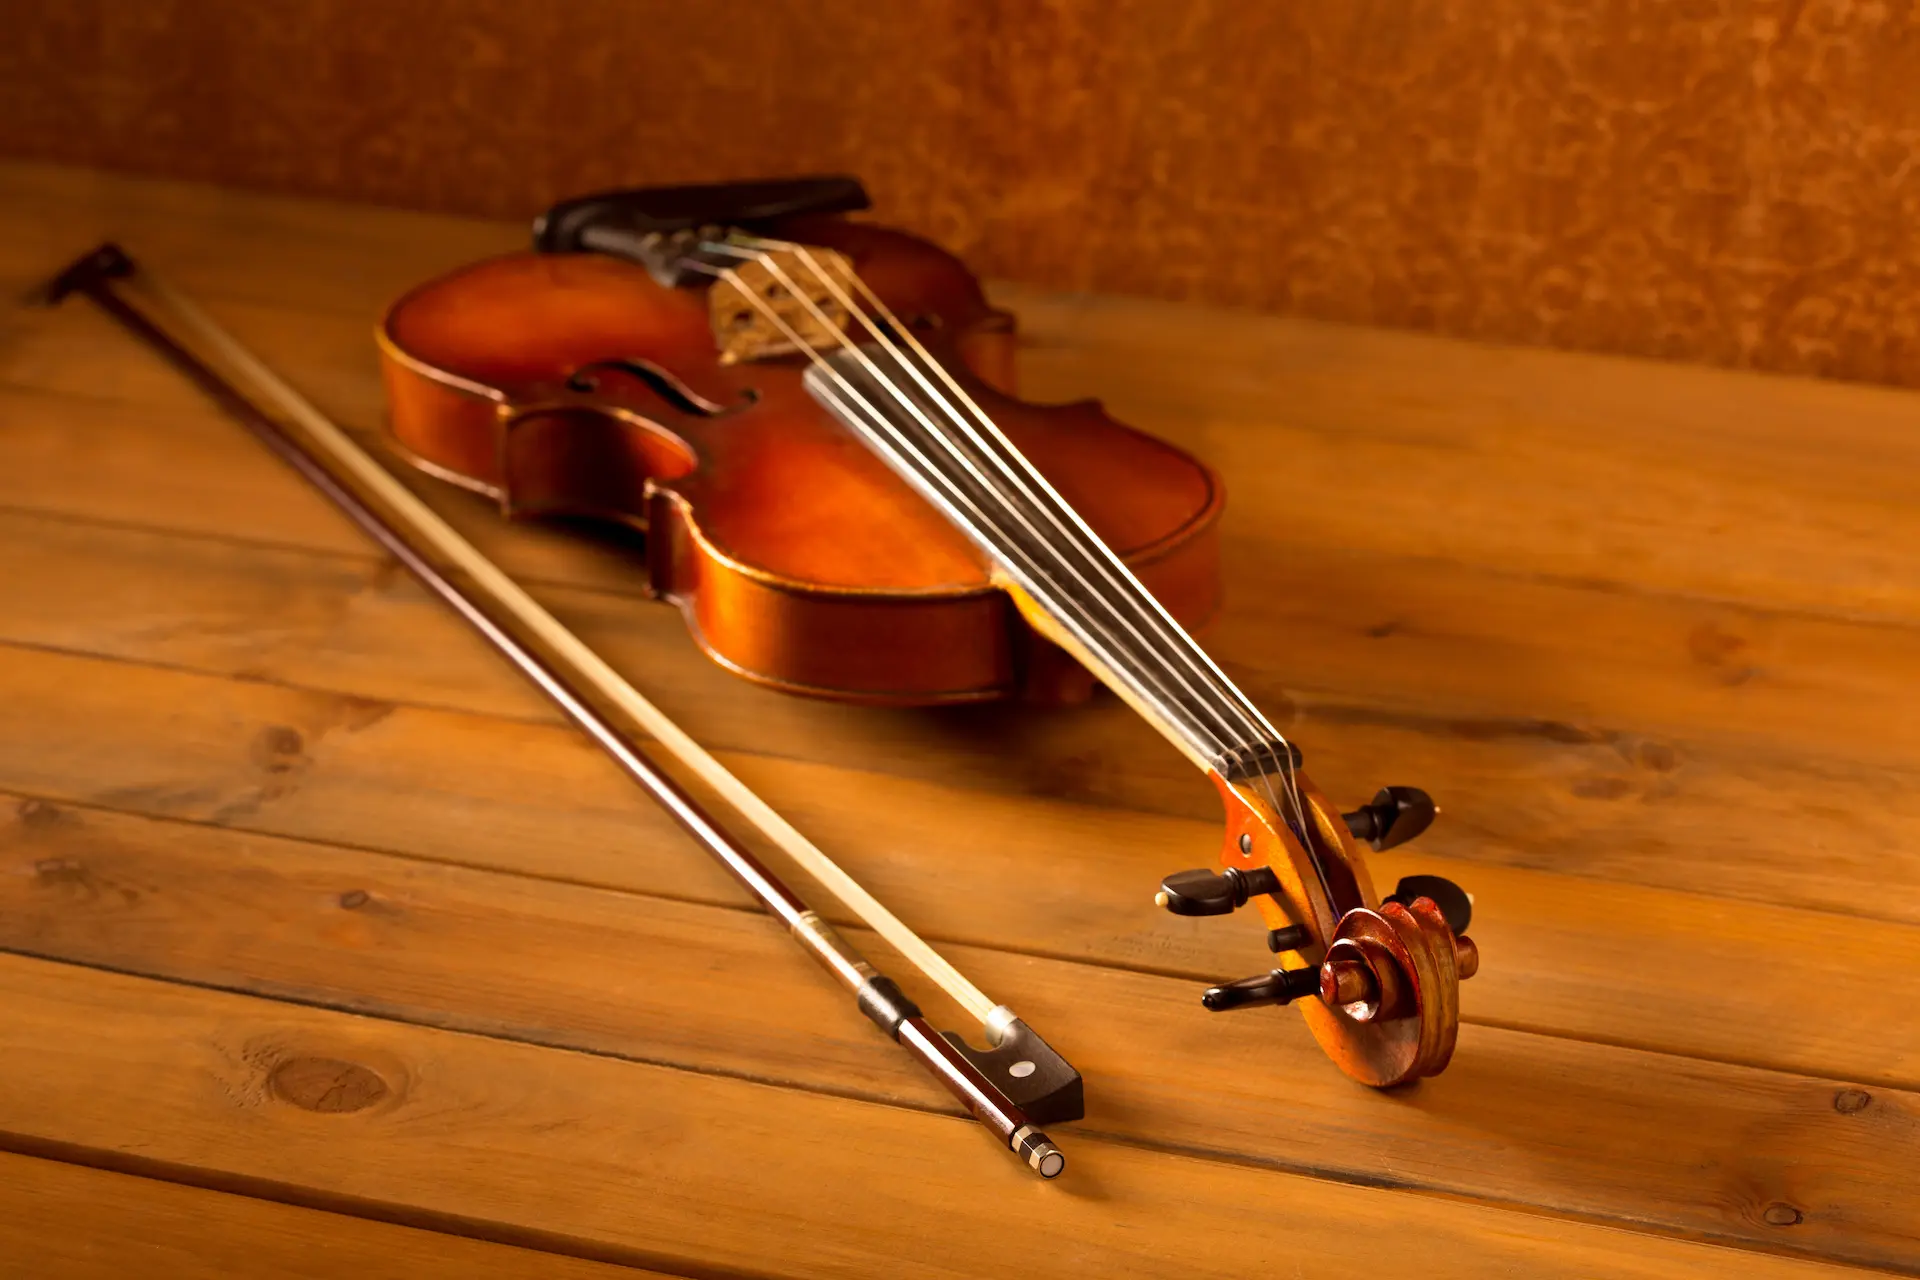 Lawmaker Proposes Fiddle As W.Va. State Instrument